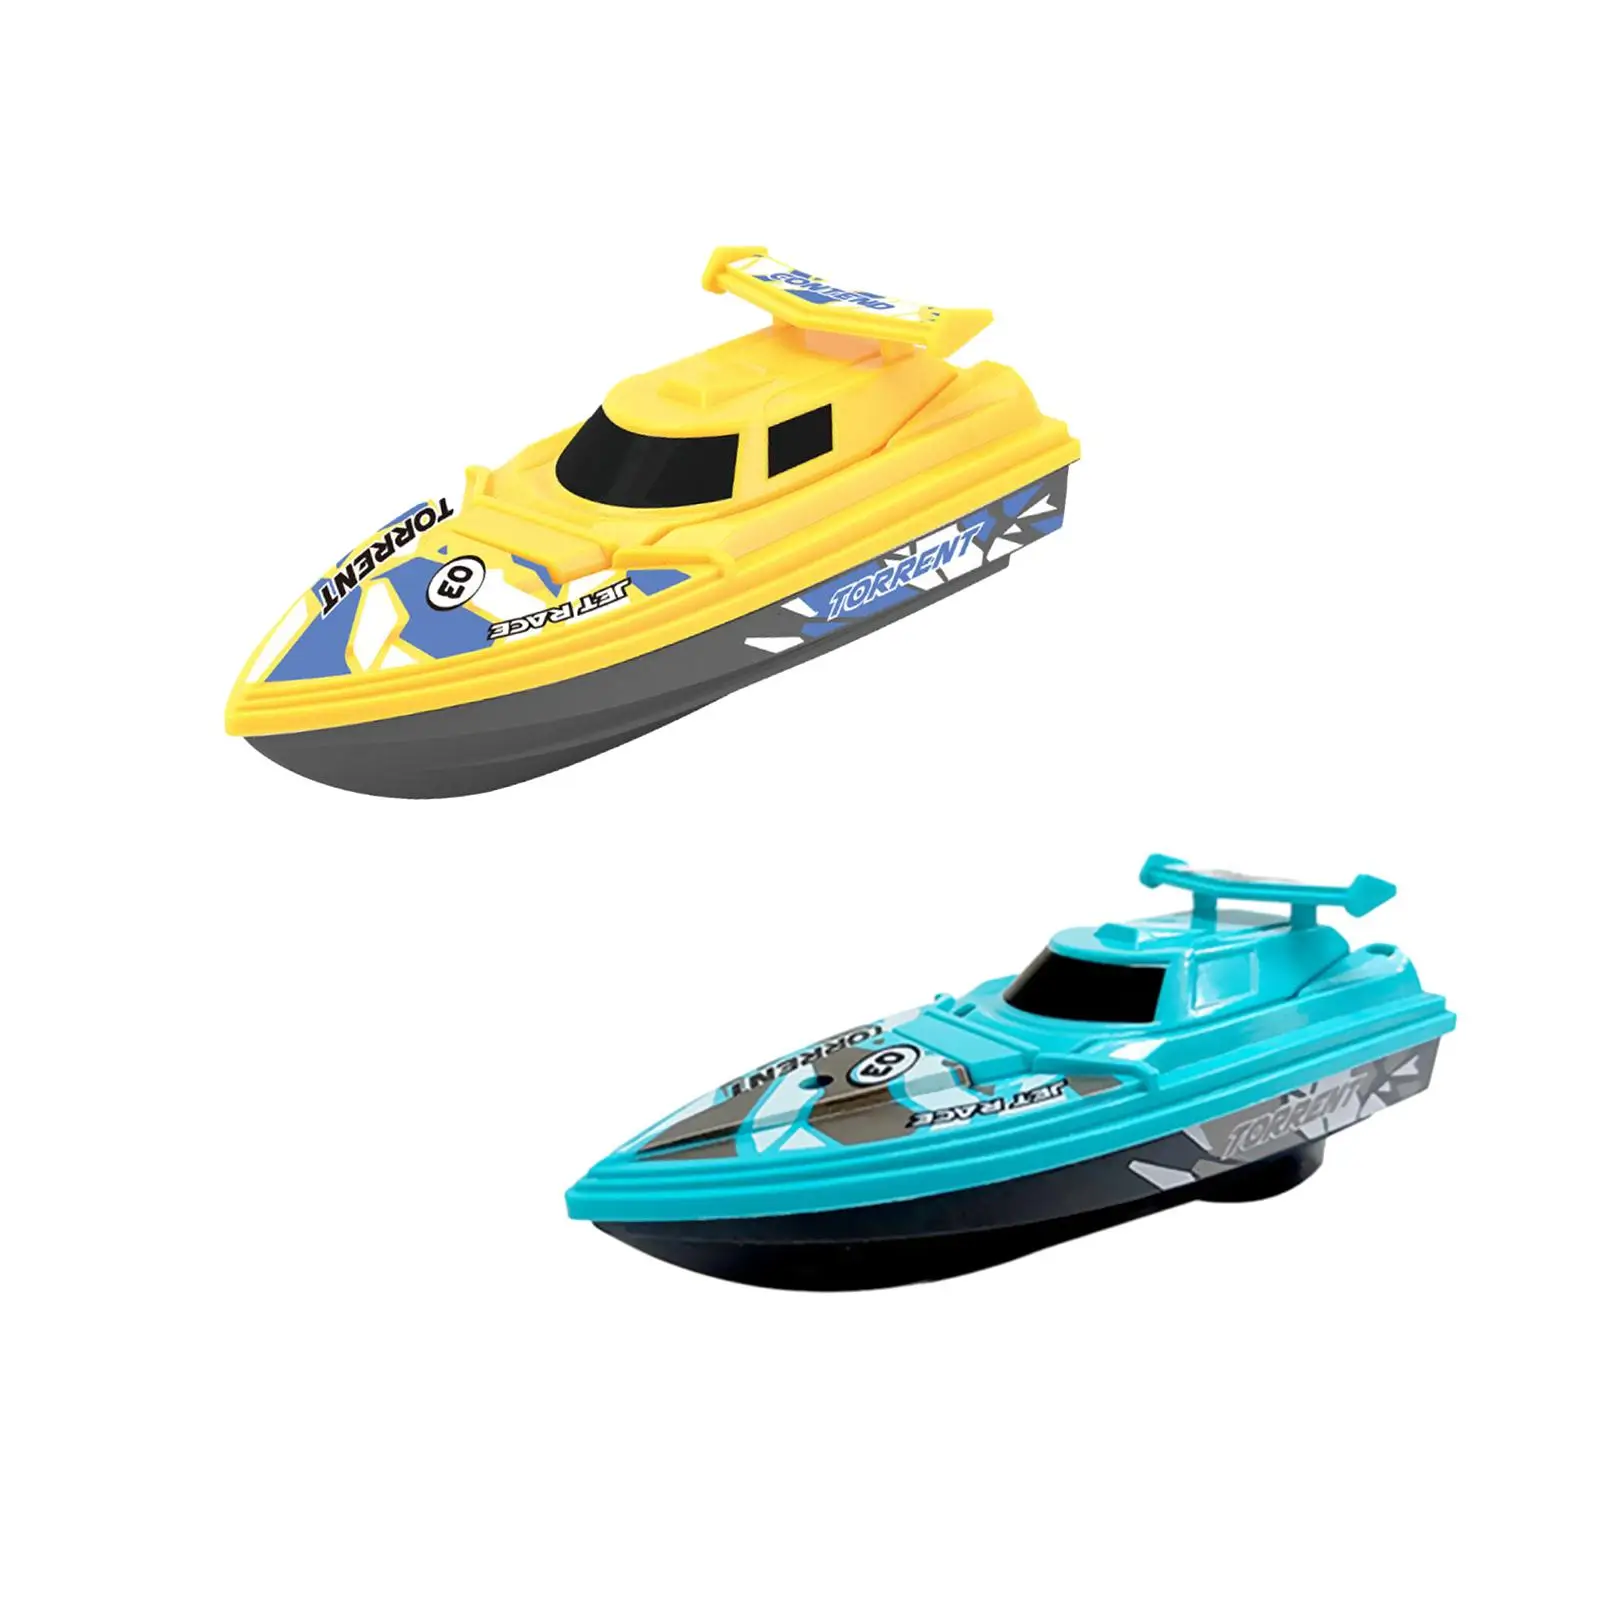 

Bath Boat Toy Christmas Gifts Outdoor Water Toy Yacht Pool Toy Floating Toy Boats for Ages 1-3 Child Kids Infant Toddlers